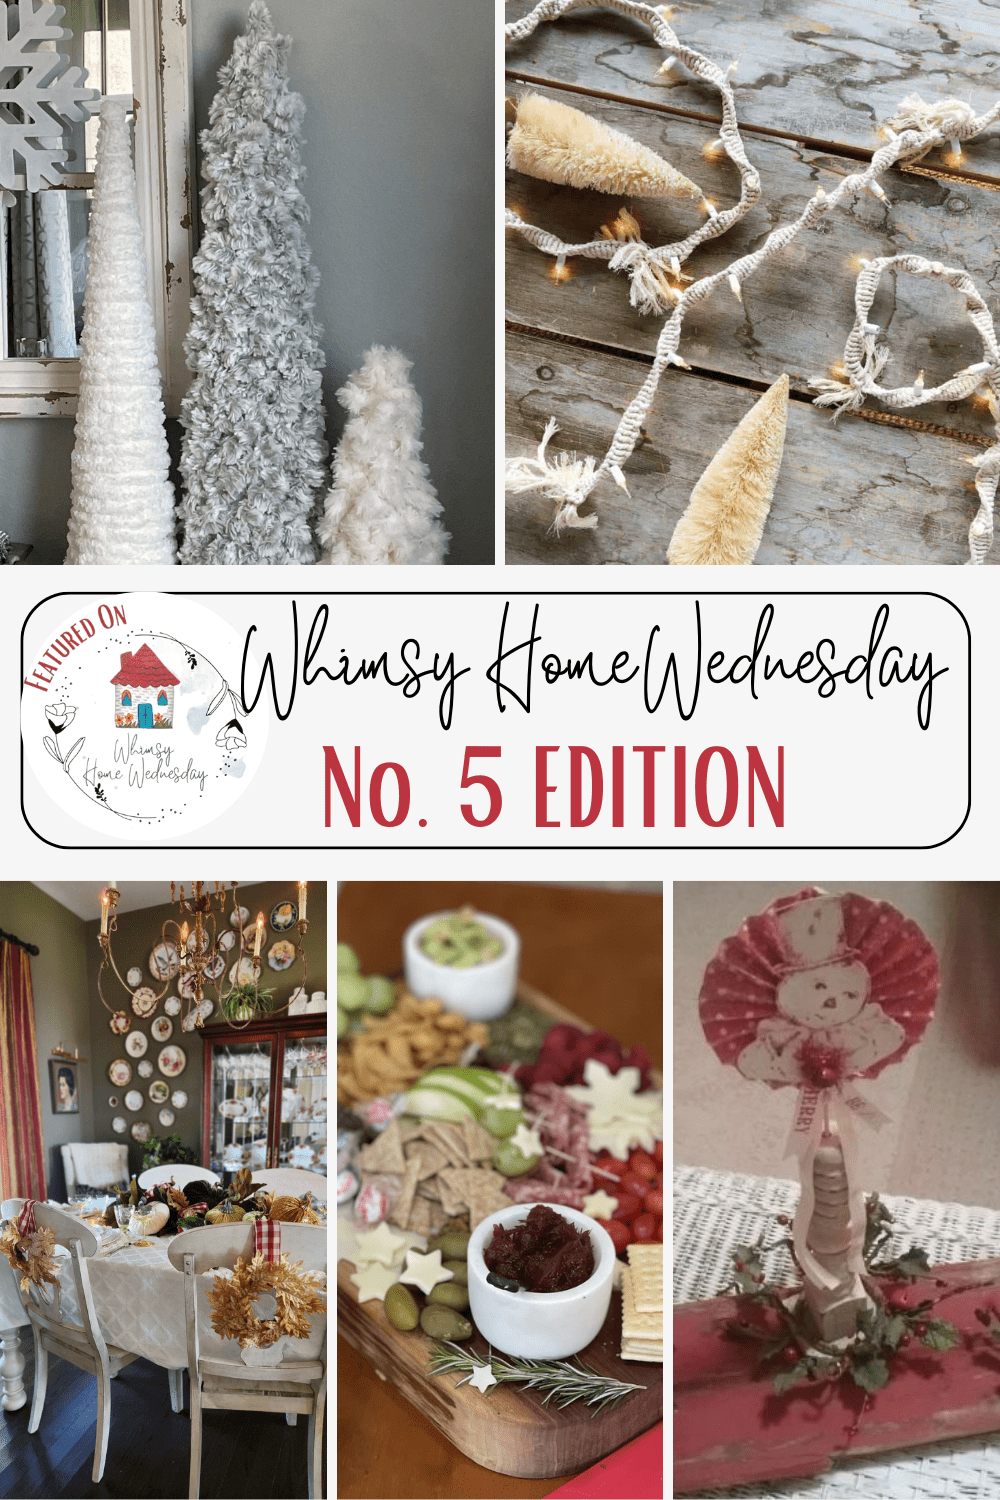 Whimsy Home Wednesday No. 5 - Whimsical Blog Link Party